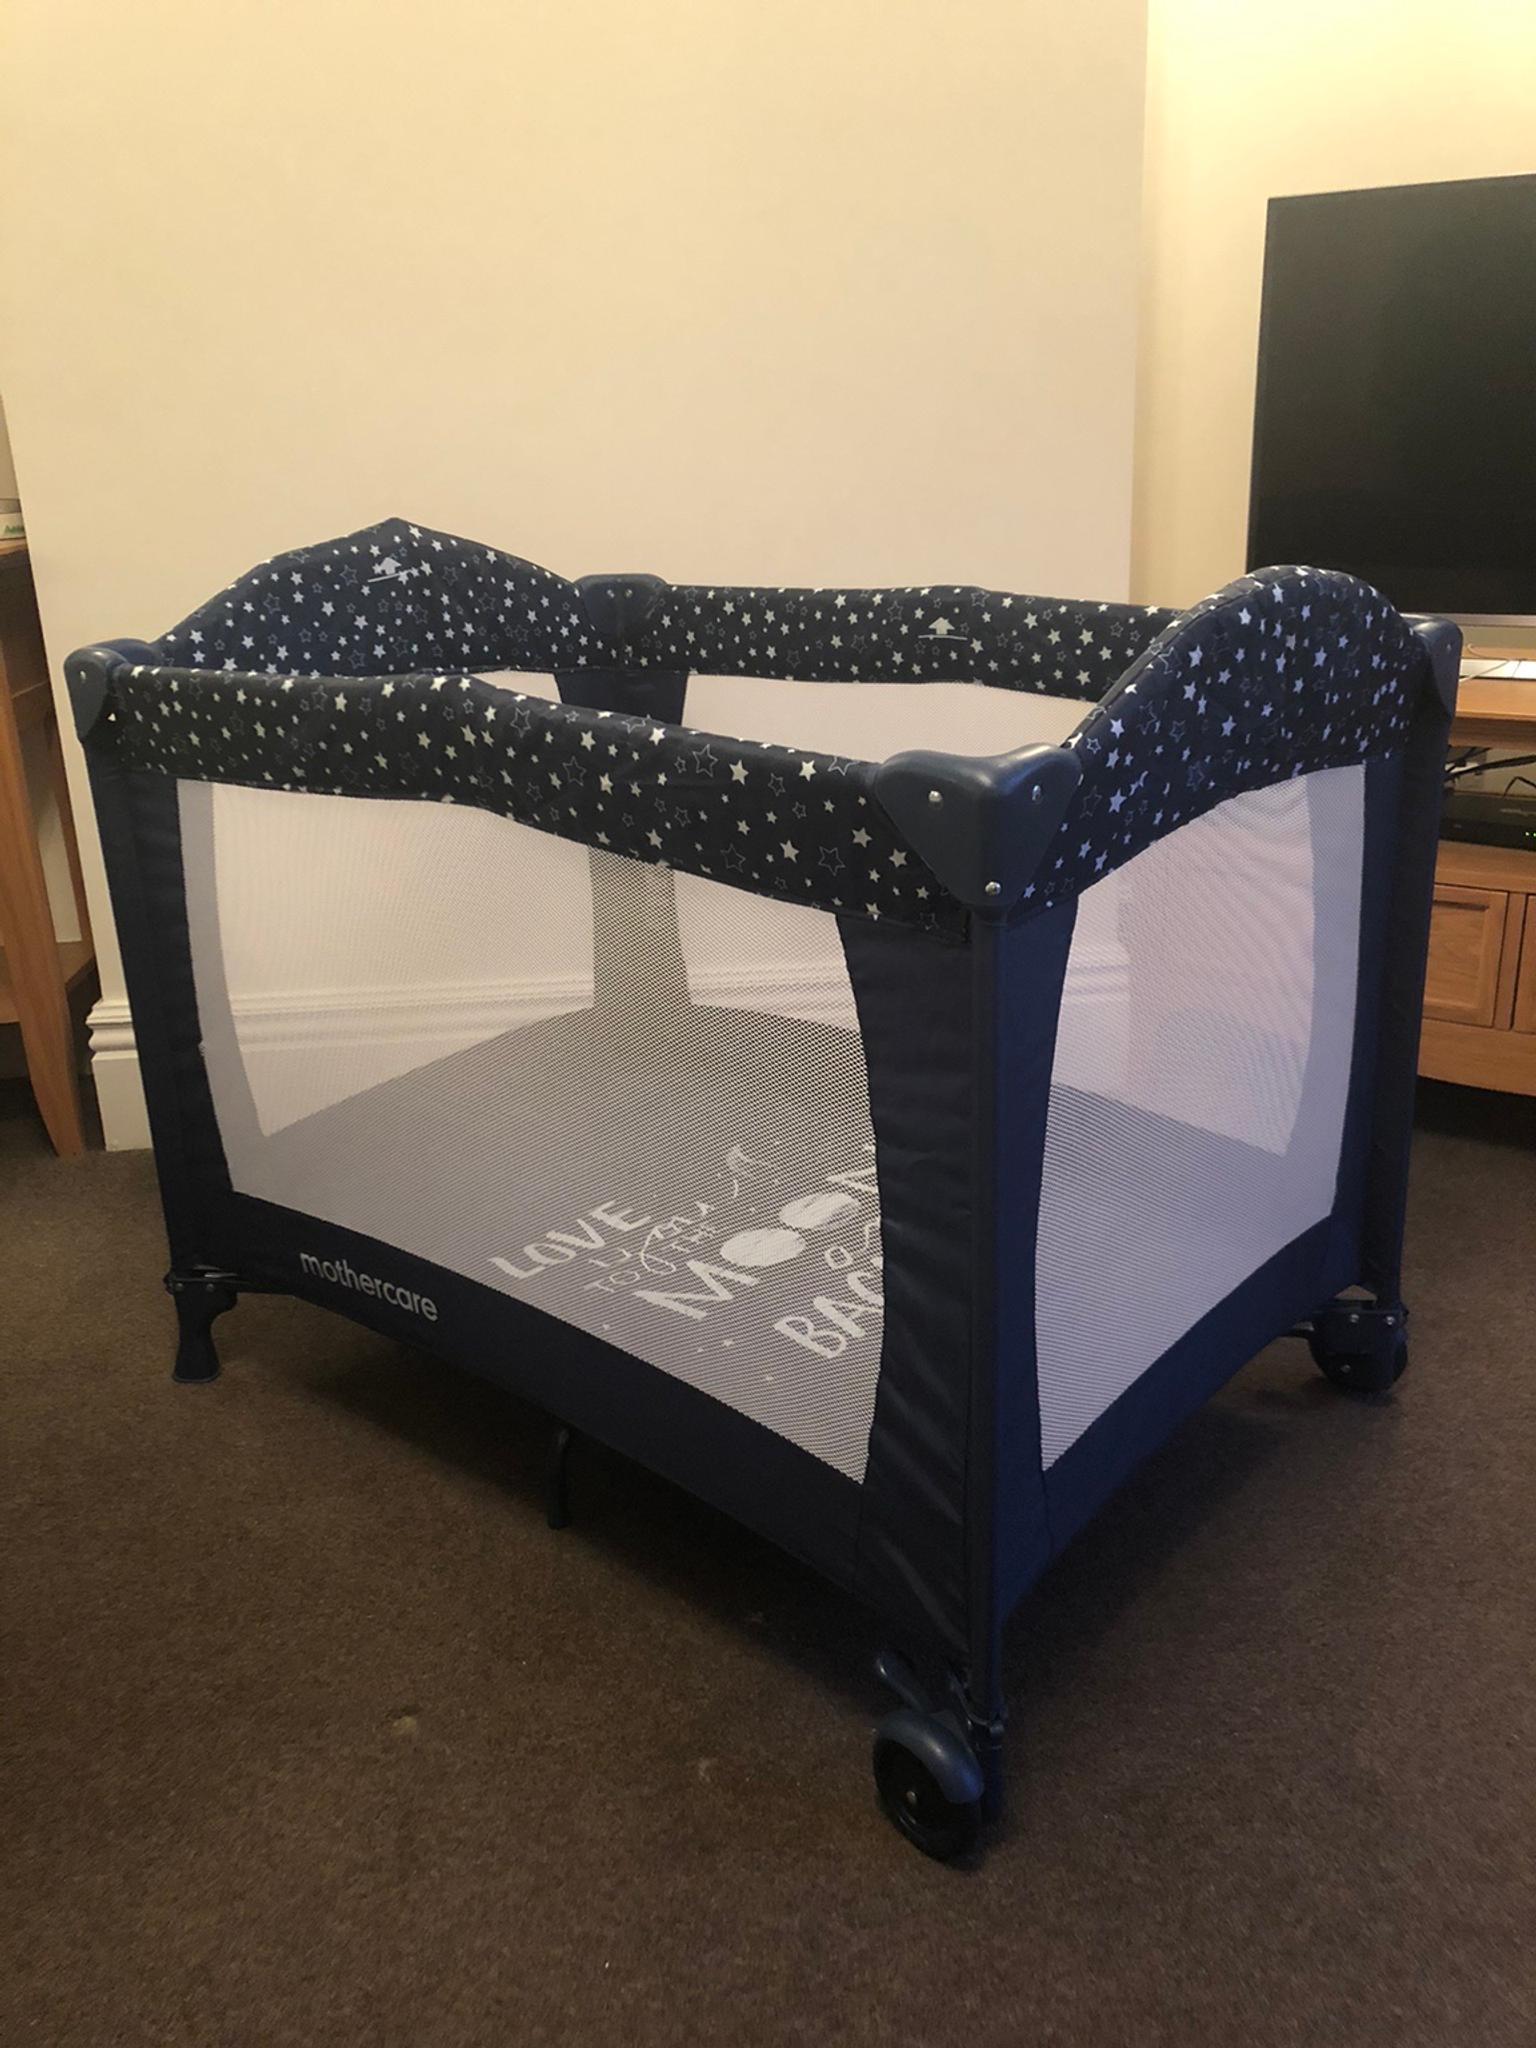 mattress for mothercare travel cot